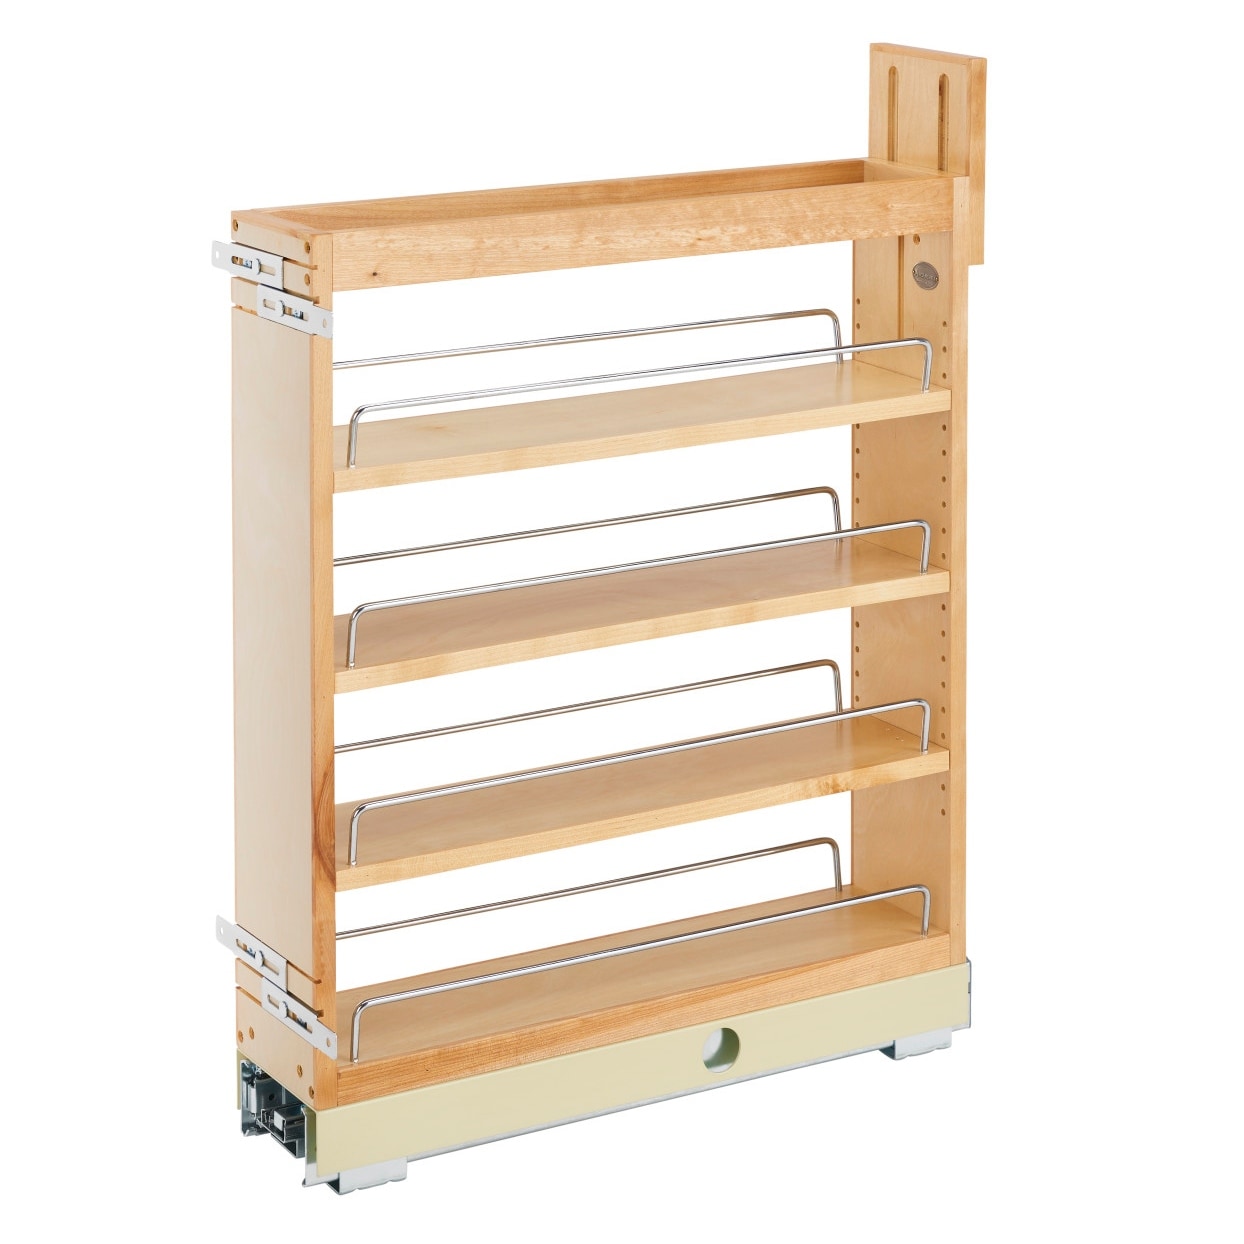 Rev-A-Shelf 448 5 Pull Out Cabinet Organizer w/ Shelves (Certified  Refurbished) - 21.65 x 5 x 25.5 inches - Bed Bath & Beyond - 36514435